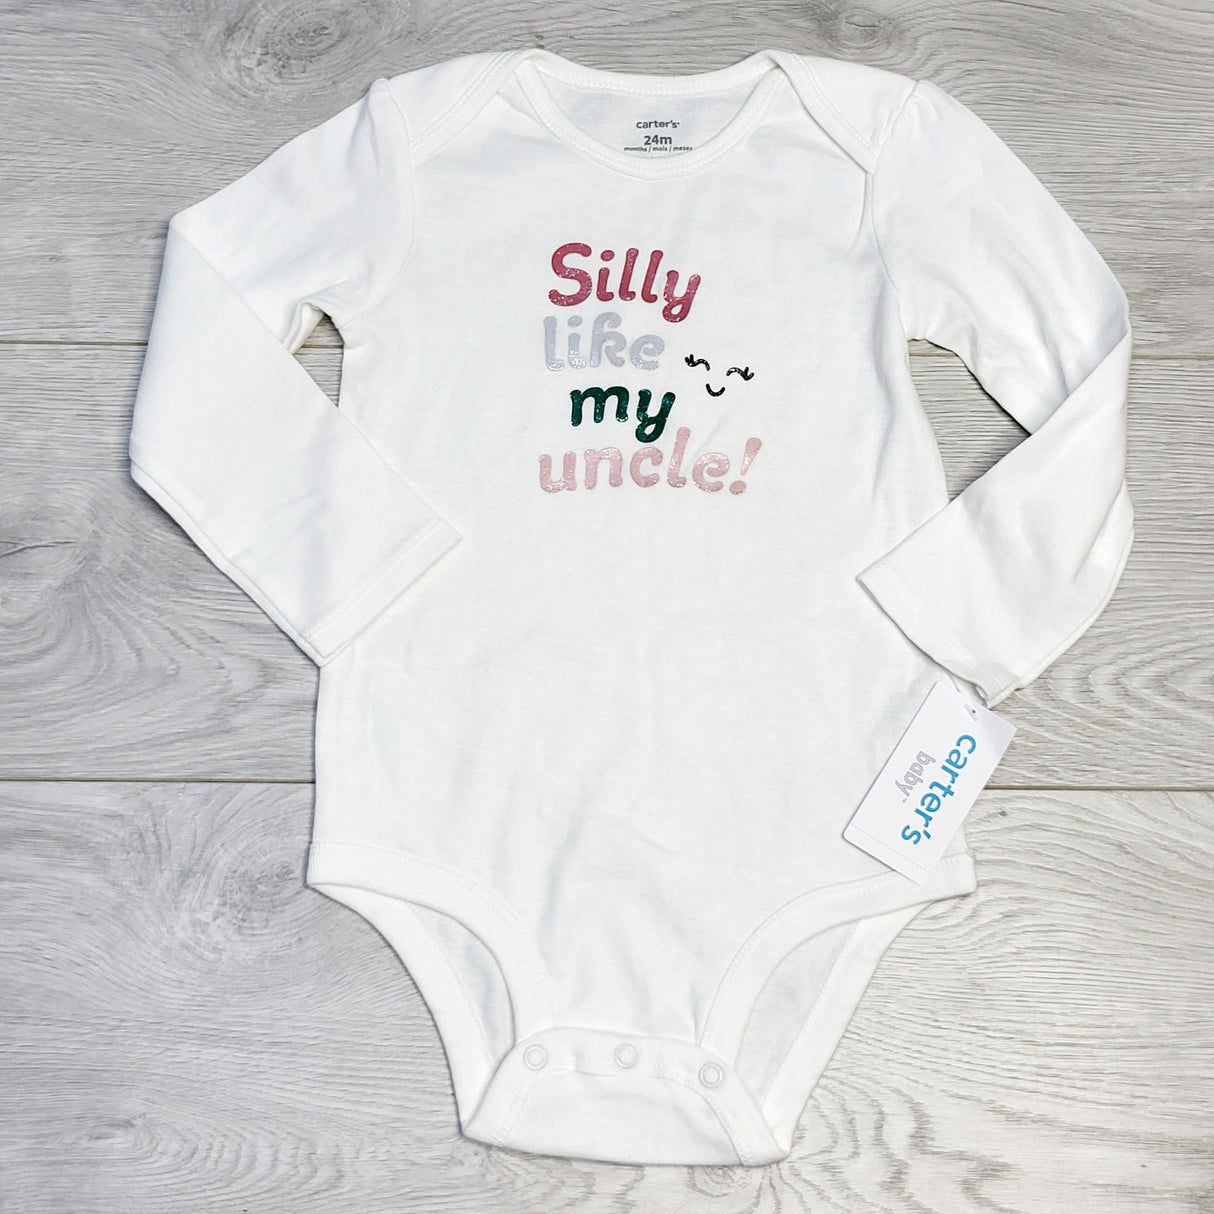 CHOL2 - NEW - Carters white "Silly Like My Uncle" onesie, 24 months